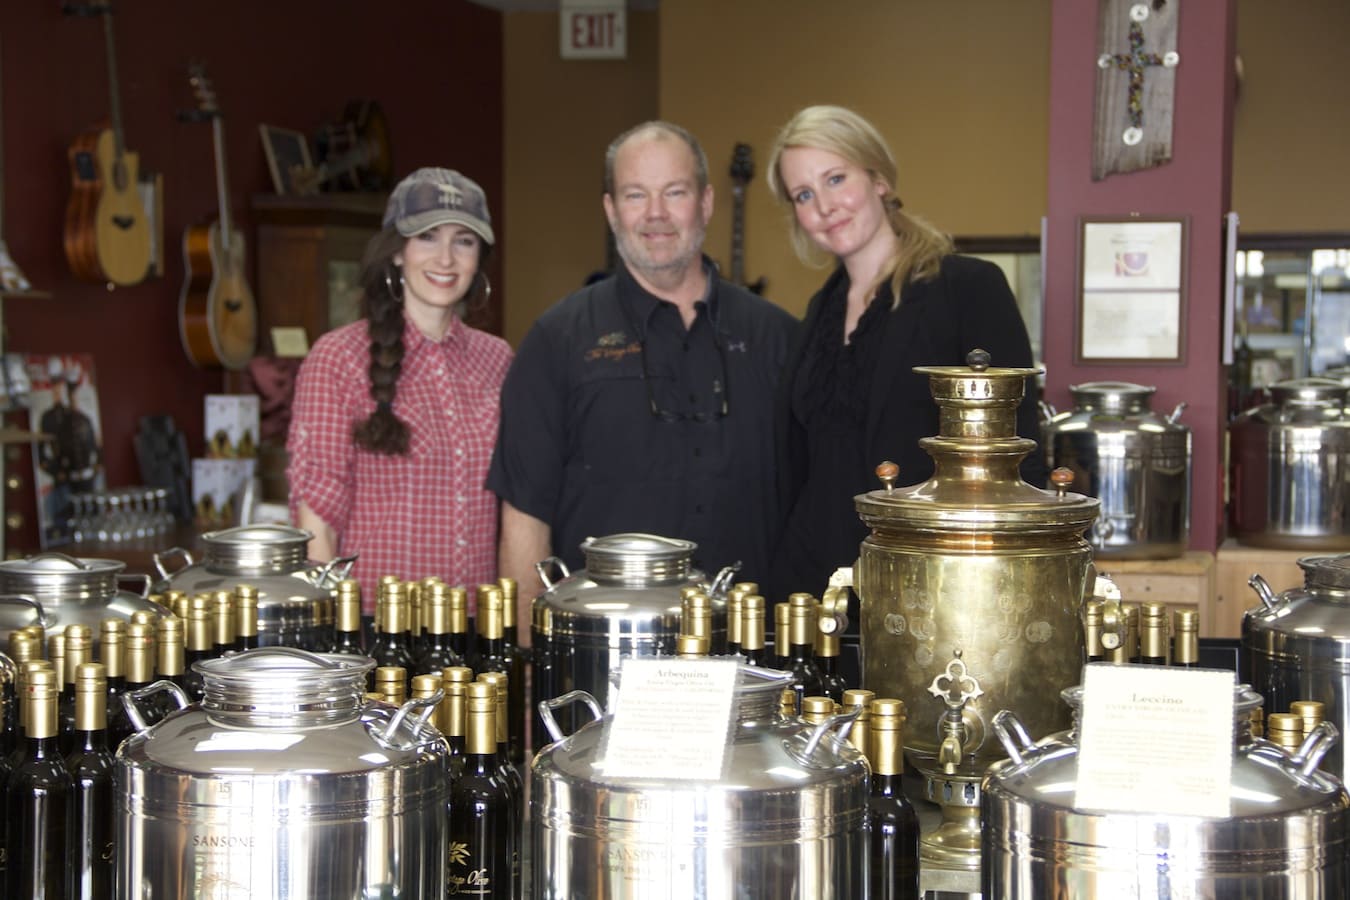 Ed and Carley Gannon - owners of the fantastic Vintage Olive! The are experts in everything olive oil and balsamic vinegars.